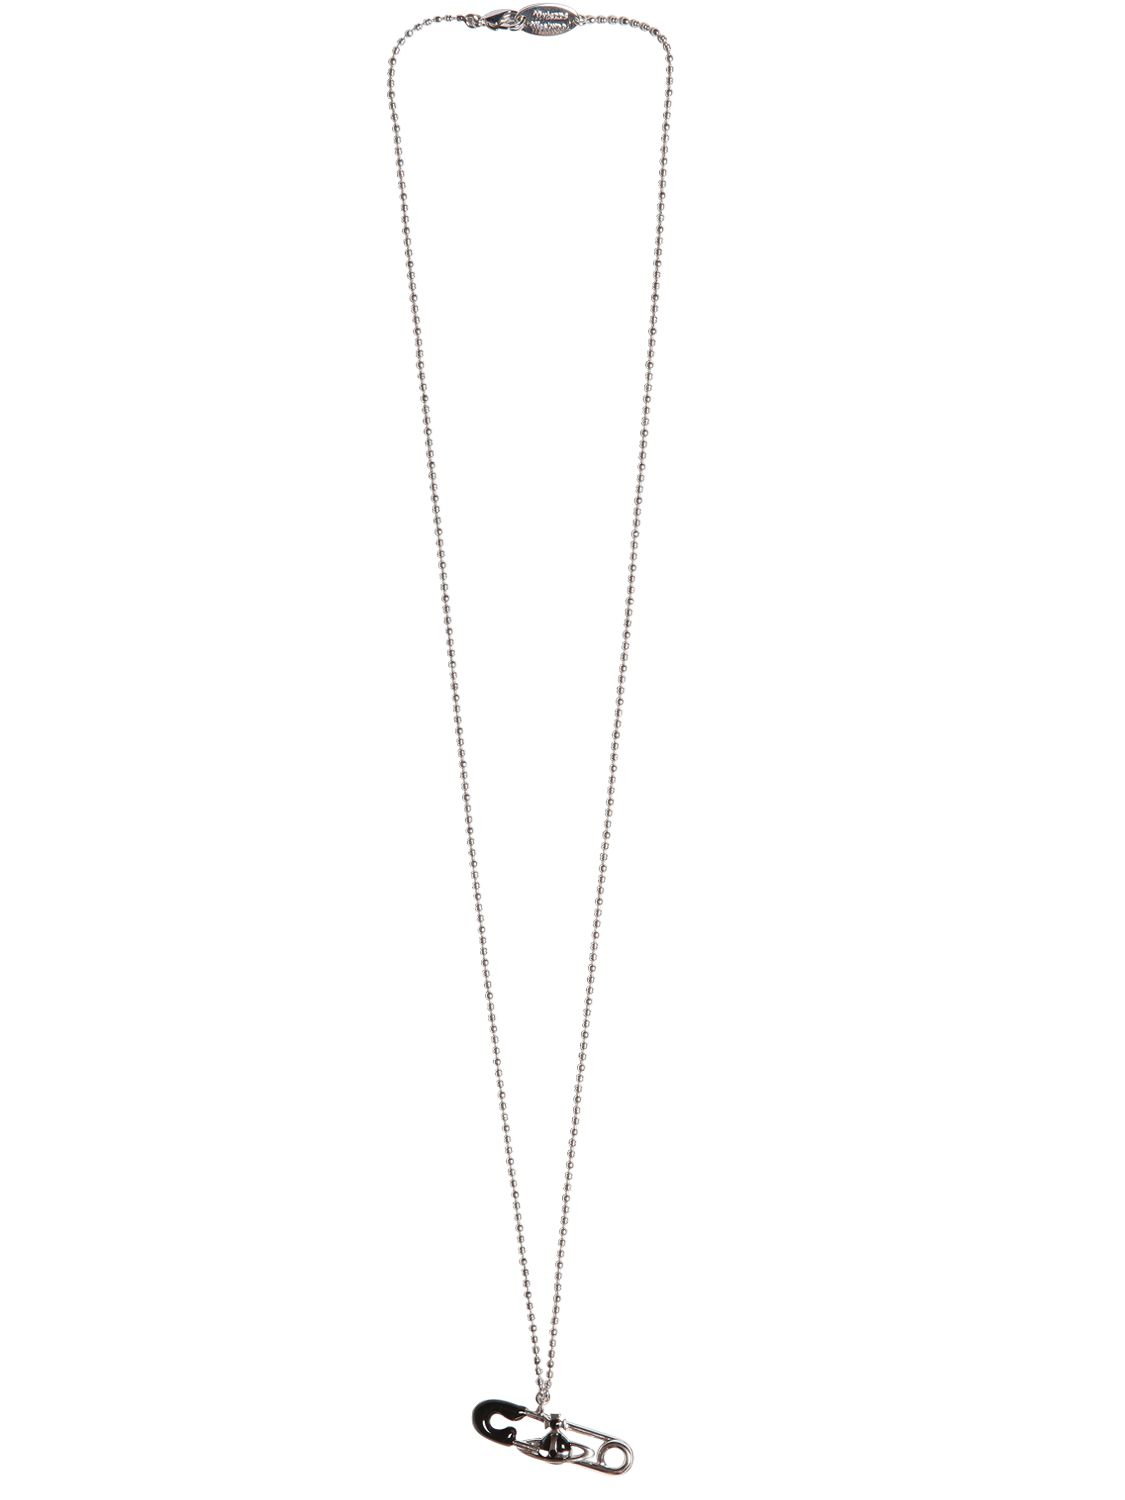 Vivienne Westwood Safety Pin Pendant On Chain Necklace in Metallic for